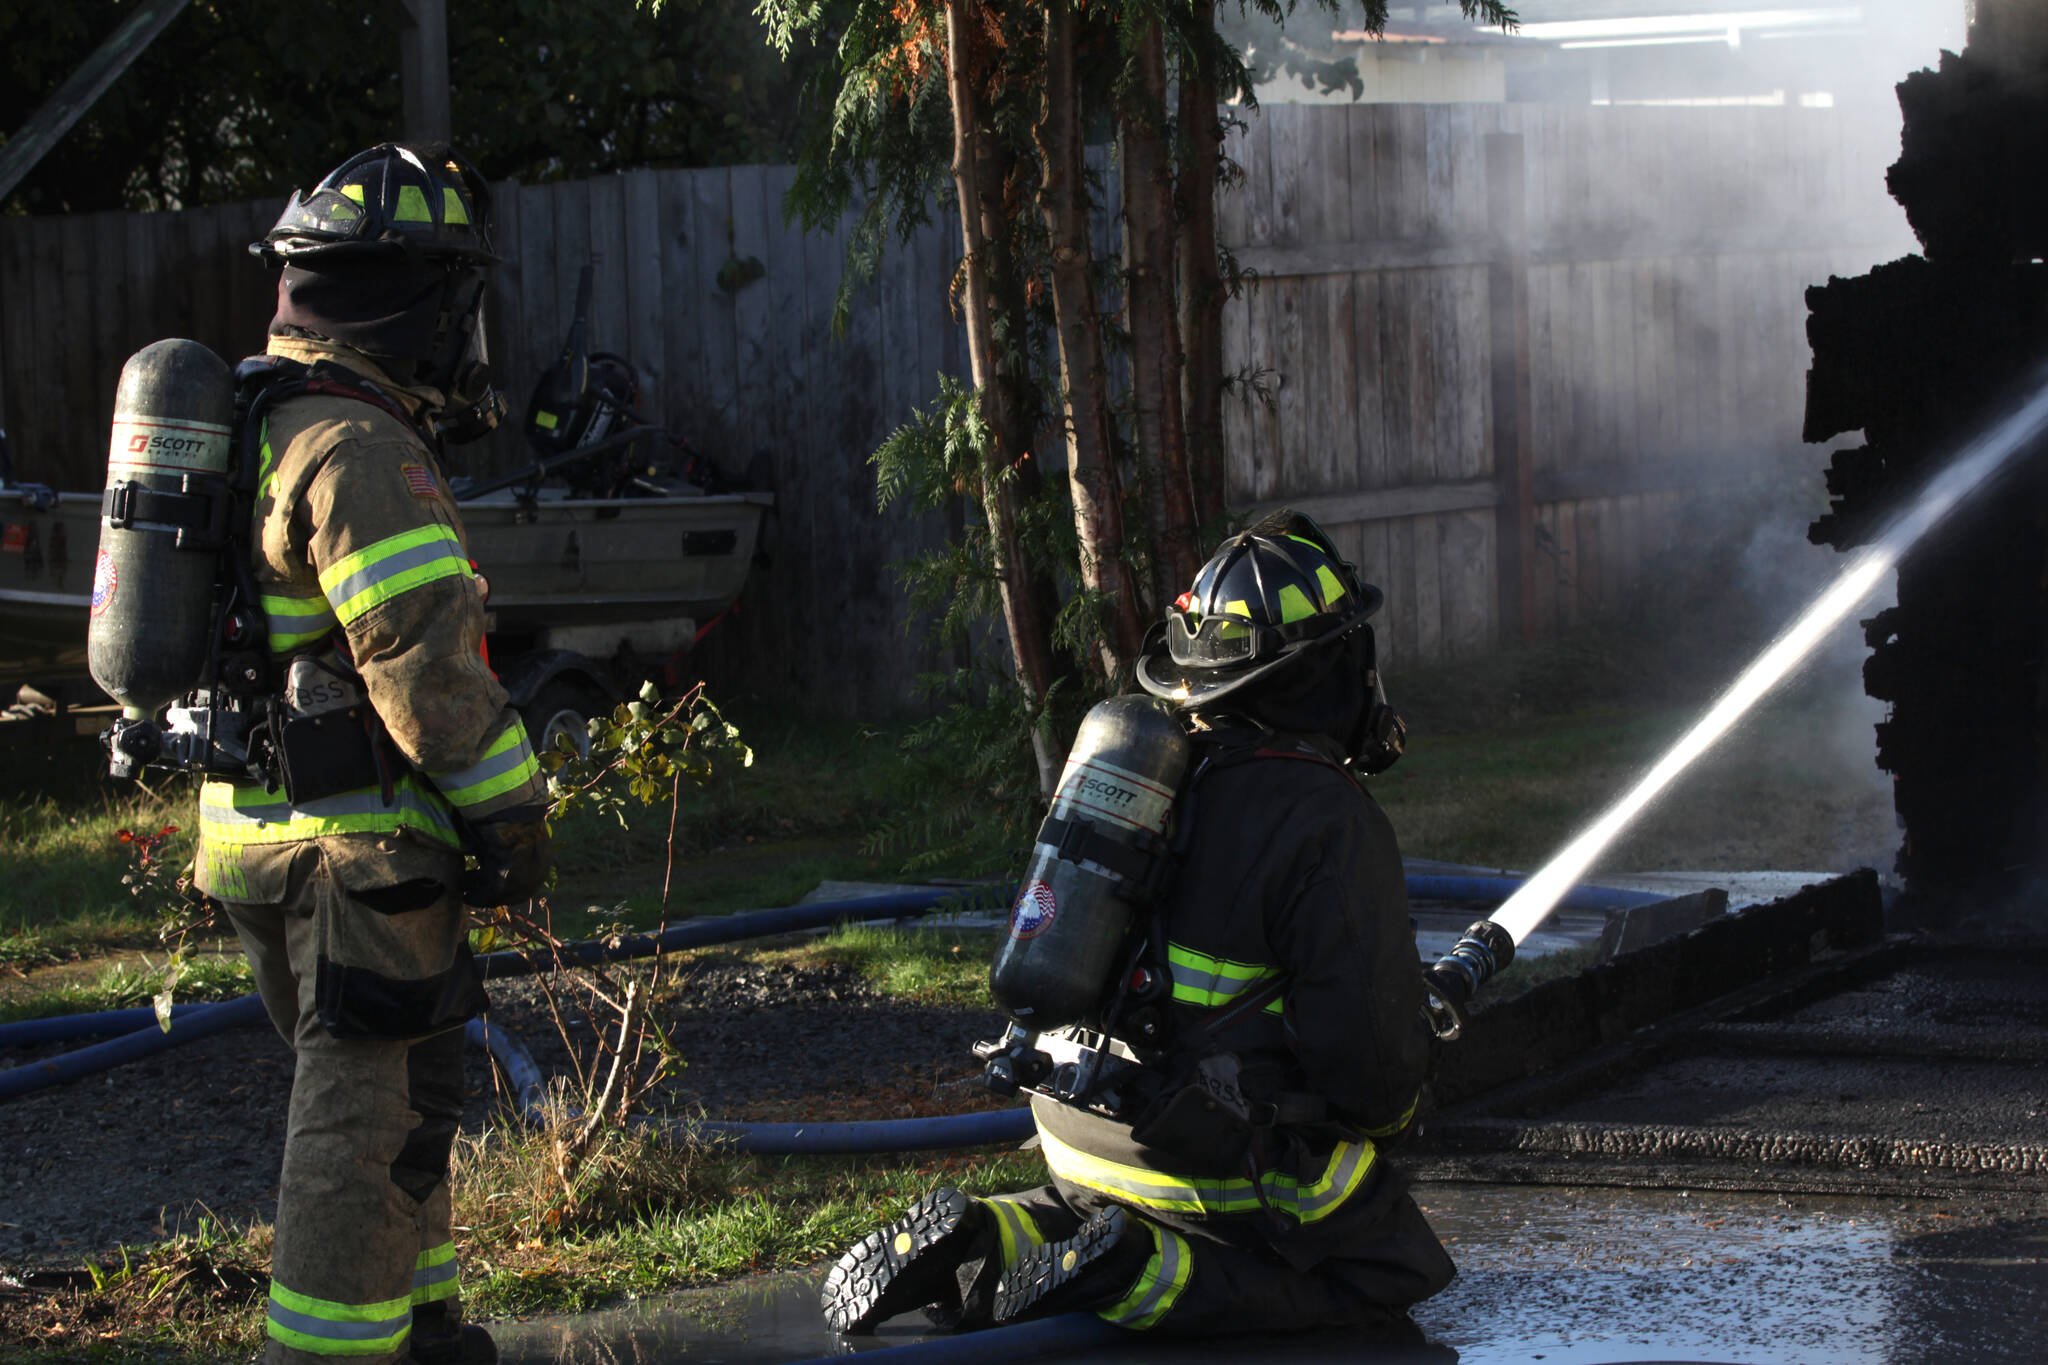 Firefighters spray down a structure fire in Elma on Nov. 15. (Michael S. Lockett / The Daily World)